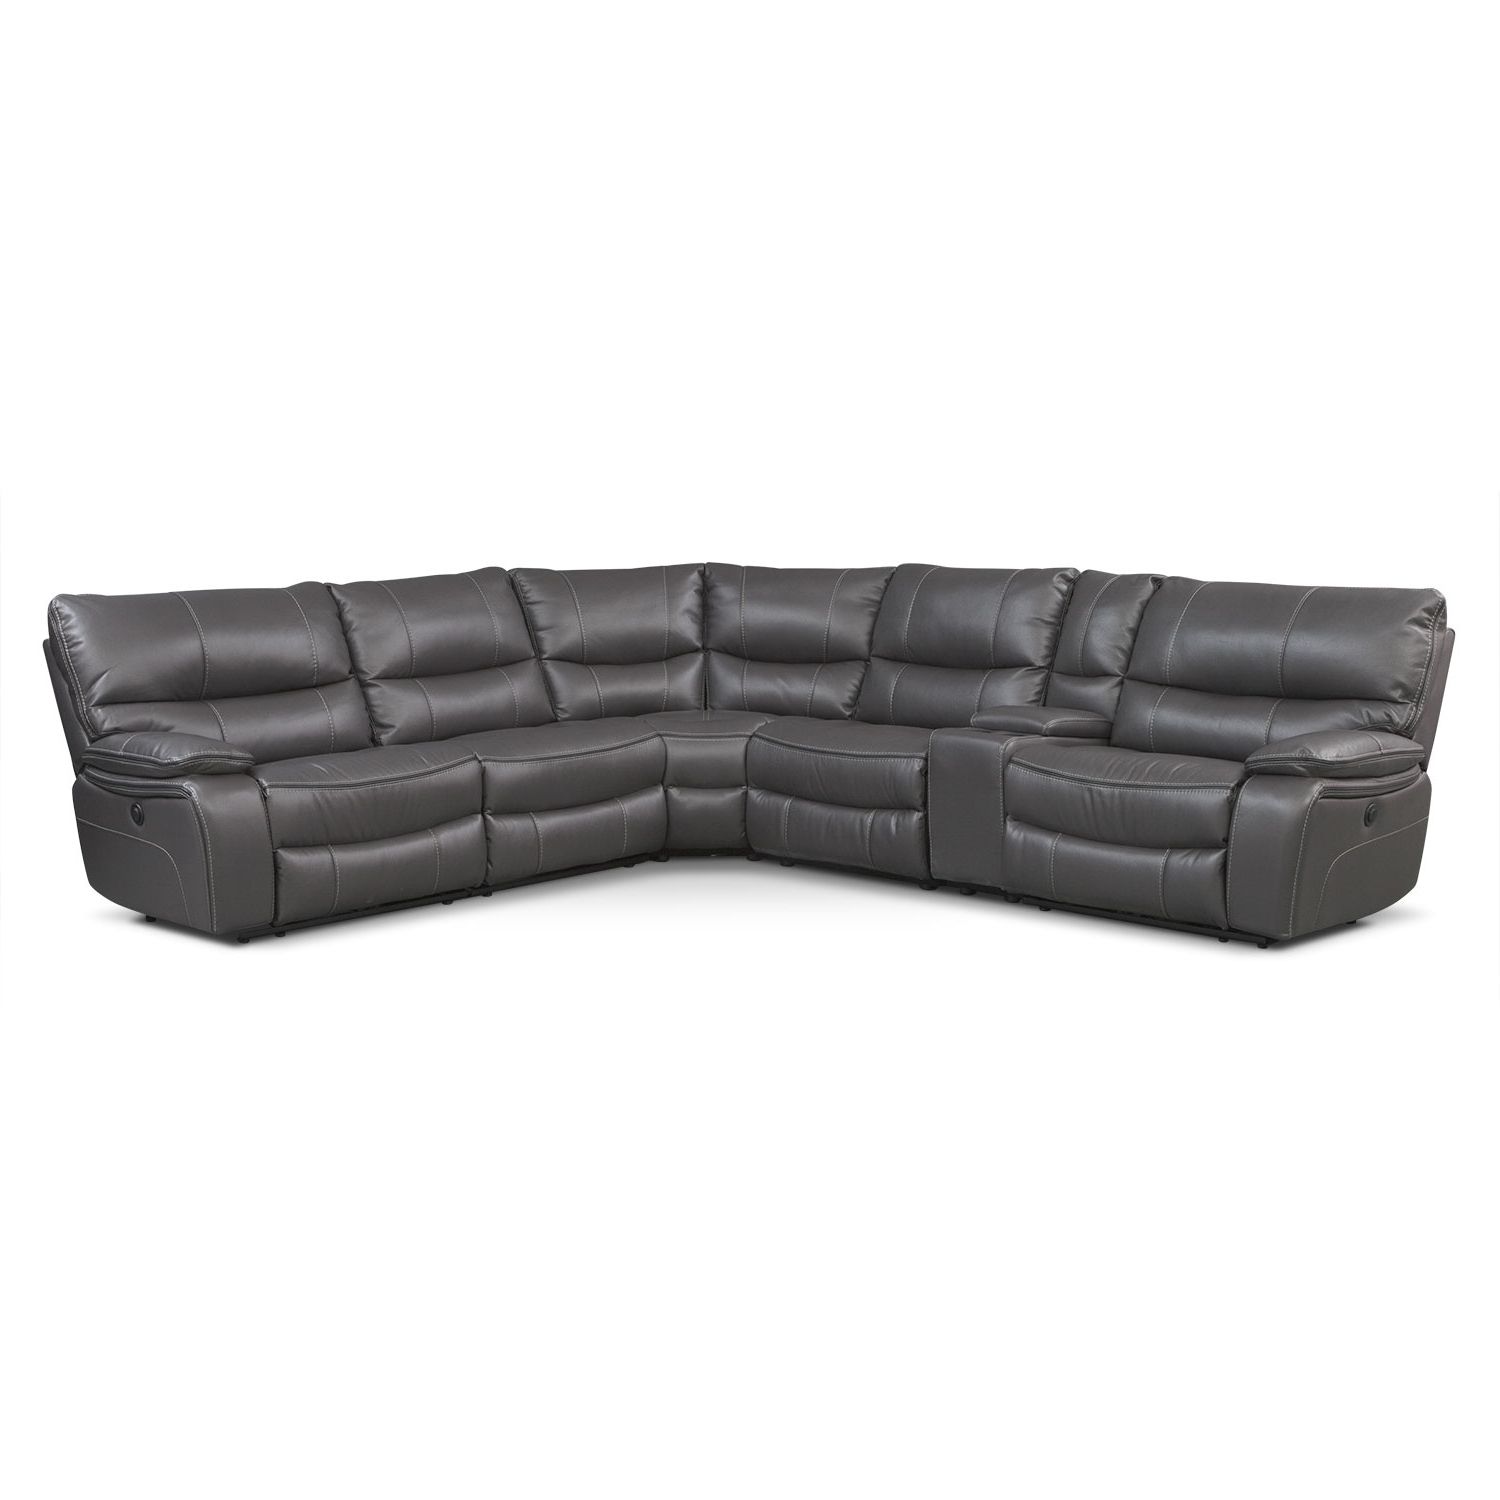 Well Known Orlando 6 Piece Power Reclining Sectional With 1 Stationary Chair With Regard To Orlando Sectional Sofas (View 4 of 20)